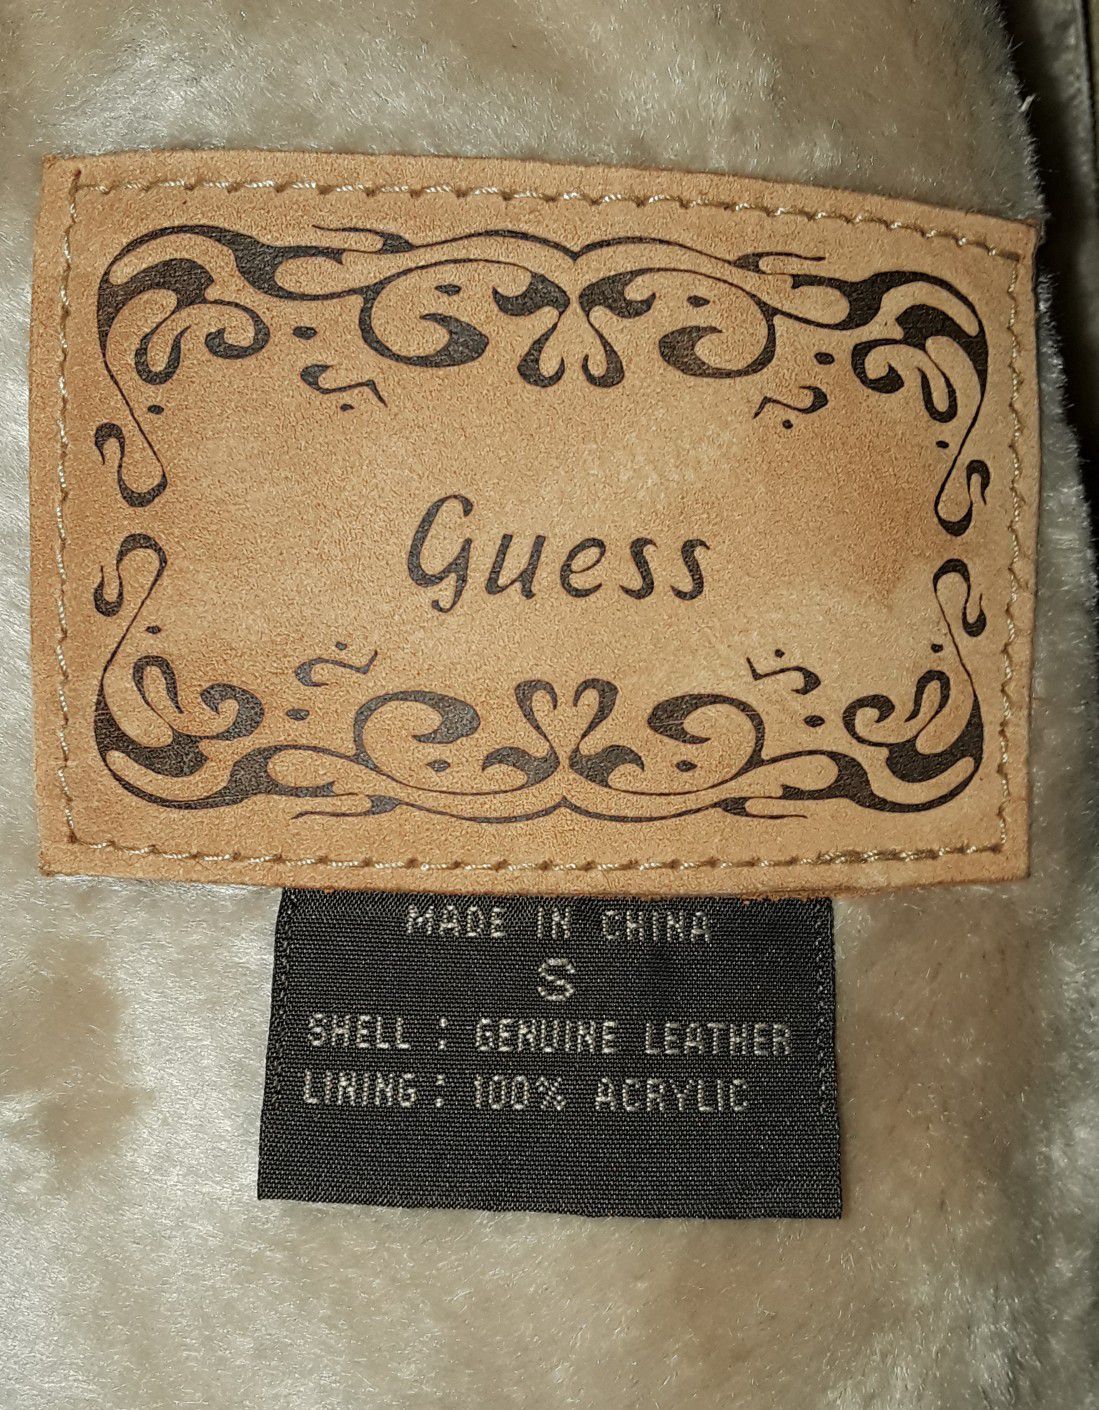 Guess Winter Coat/Color- BEIGE SUEDE LEATHER Gorgeous!